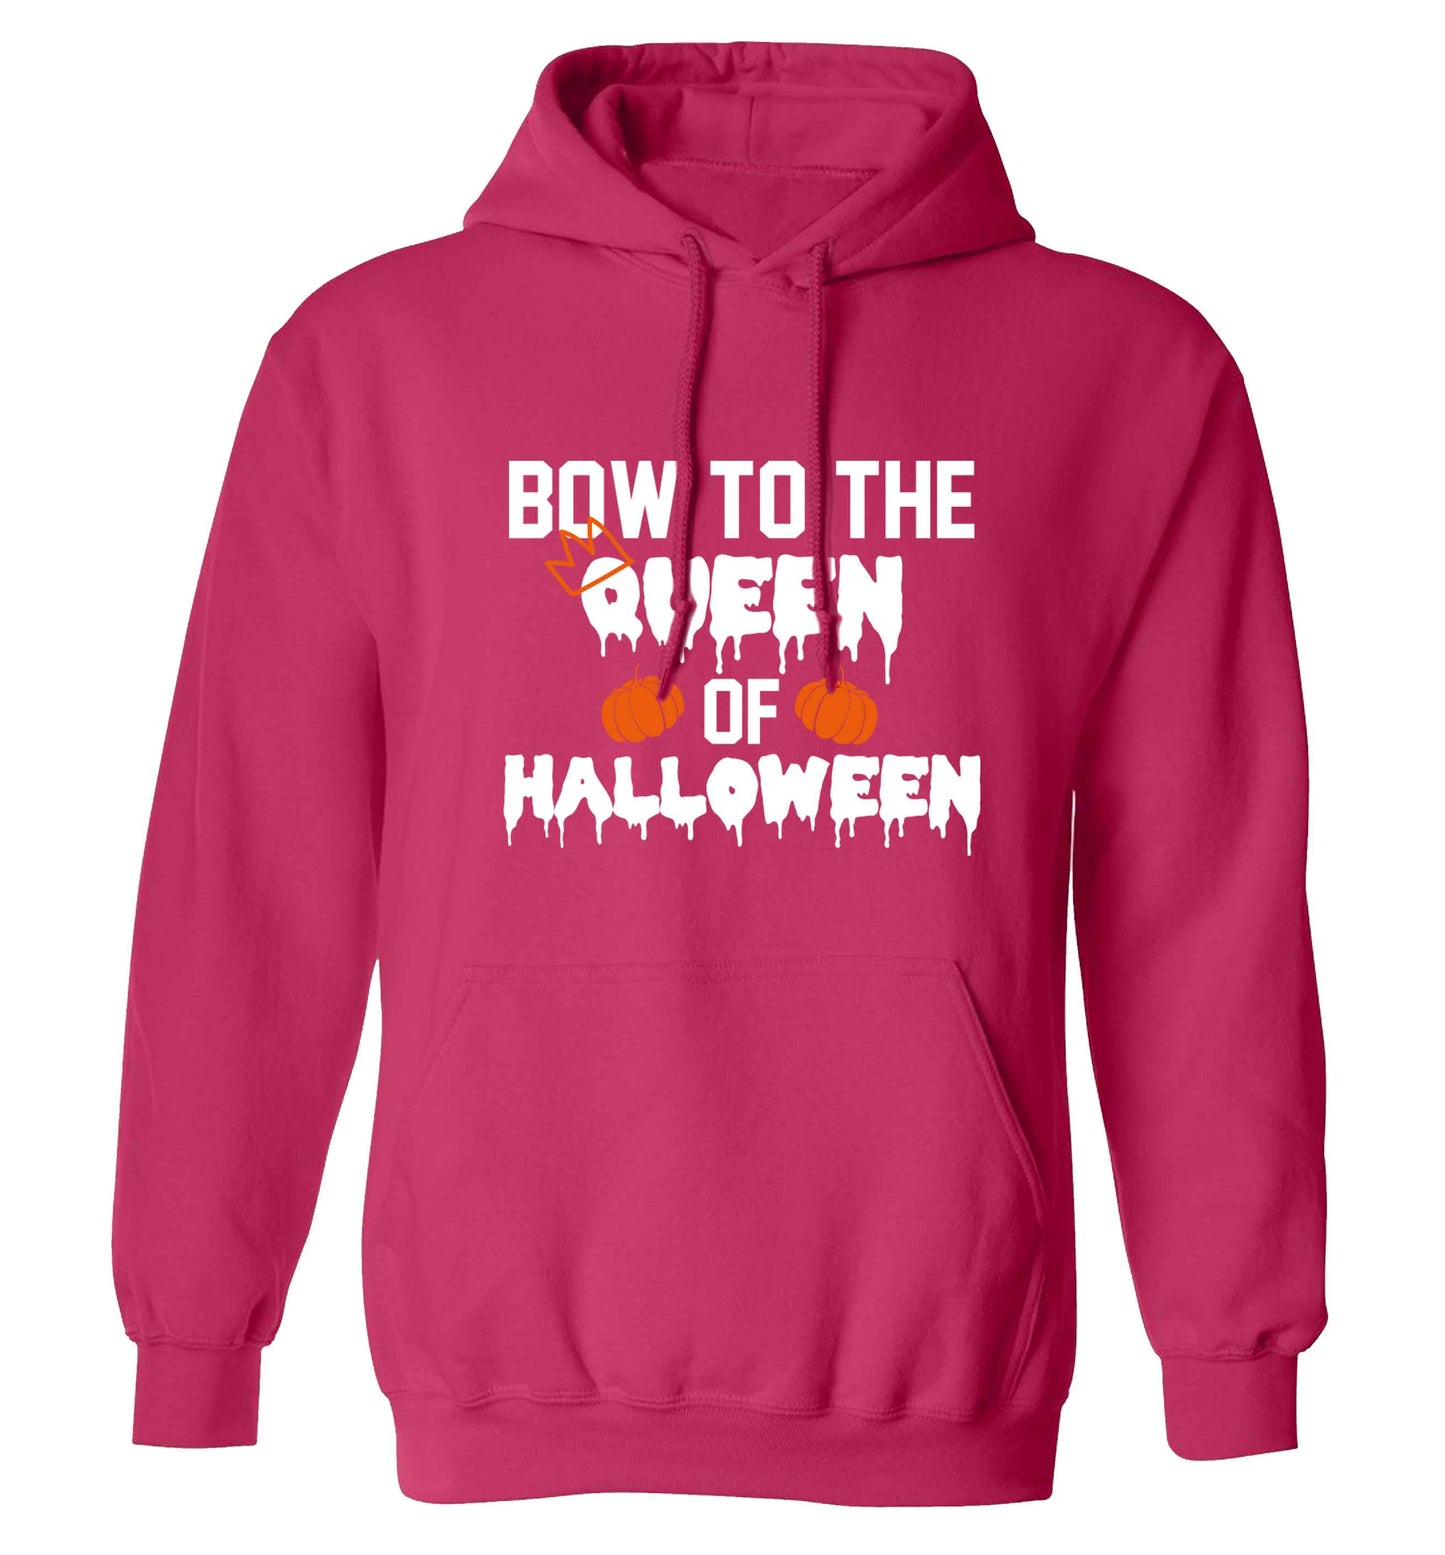 Bow to the Queen of halloween adults unisex pink hoodie 2XL